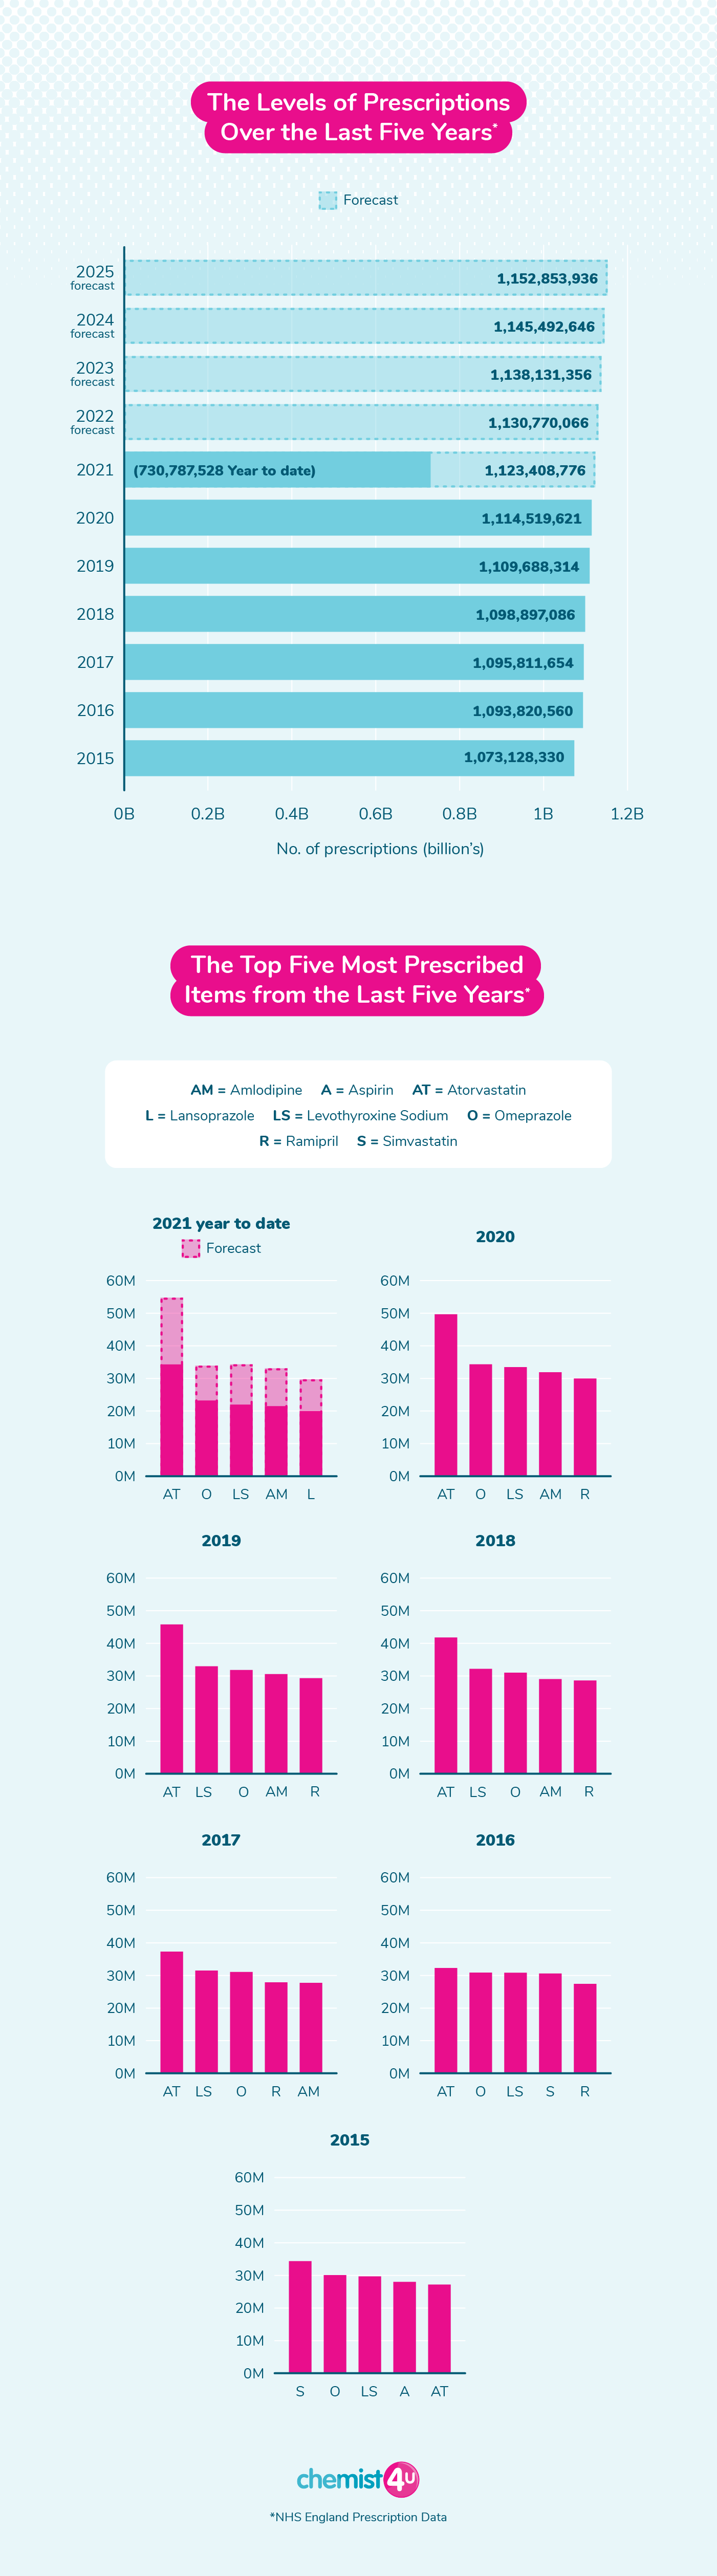 An infographic highlighting the levels of prescriptions over the last five years.